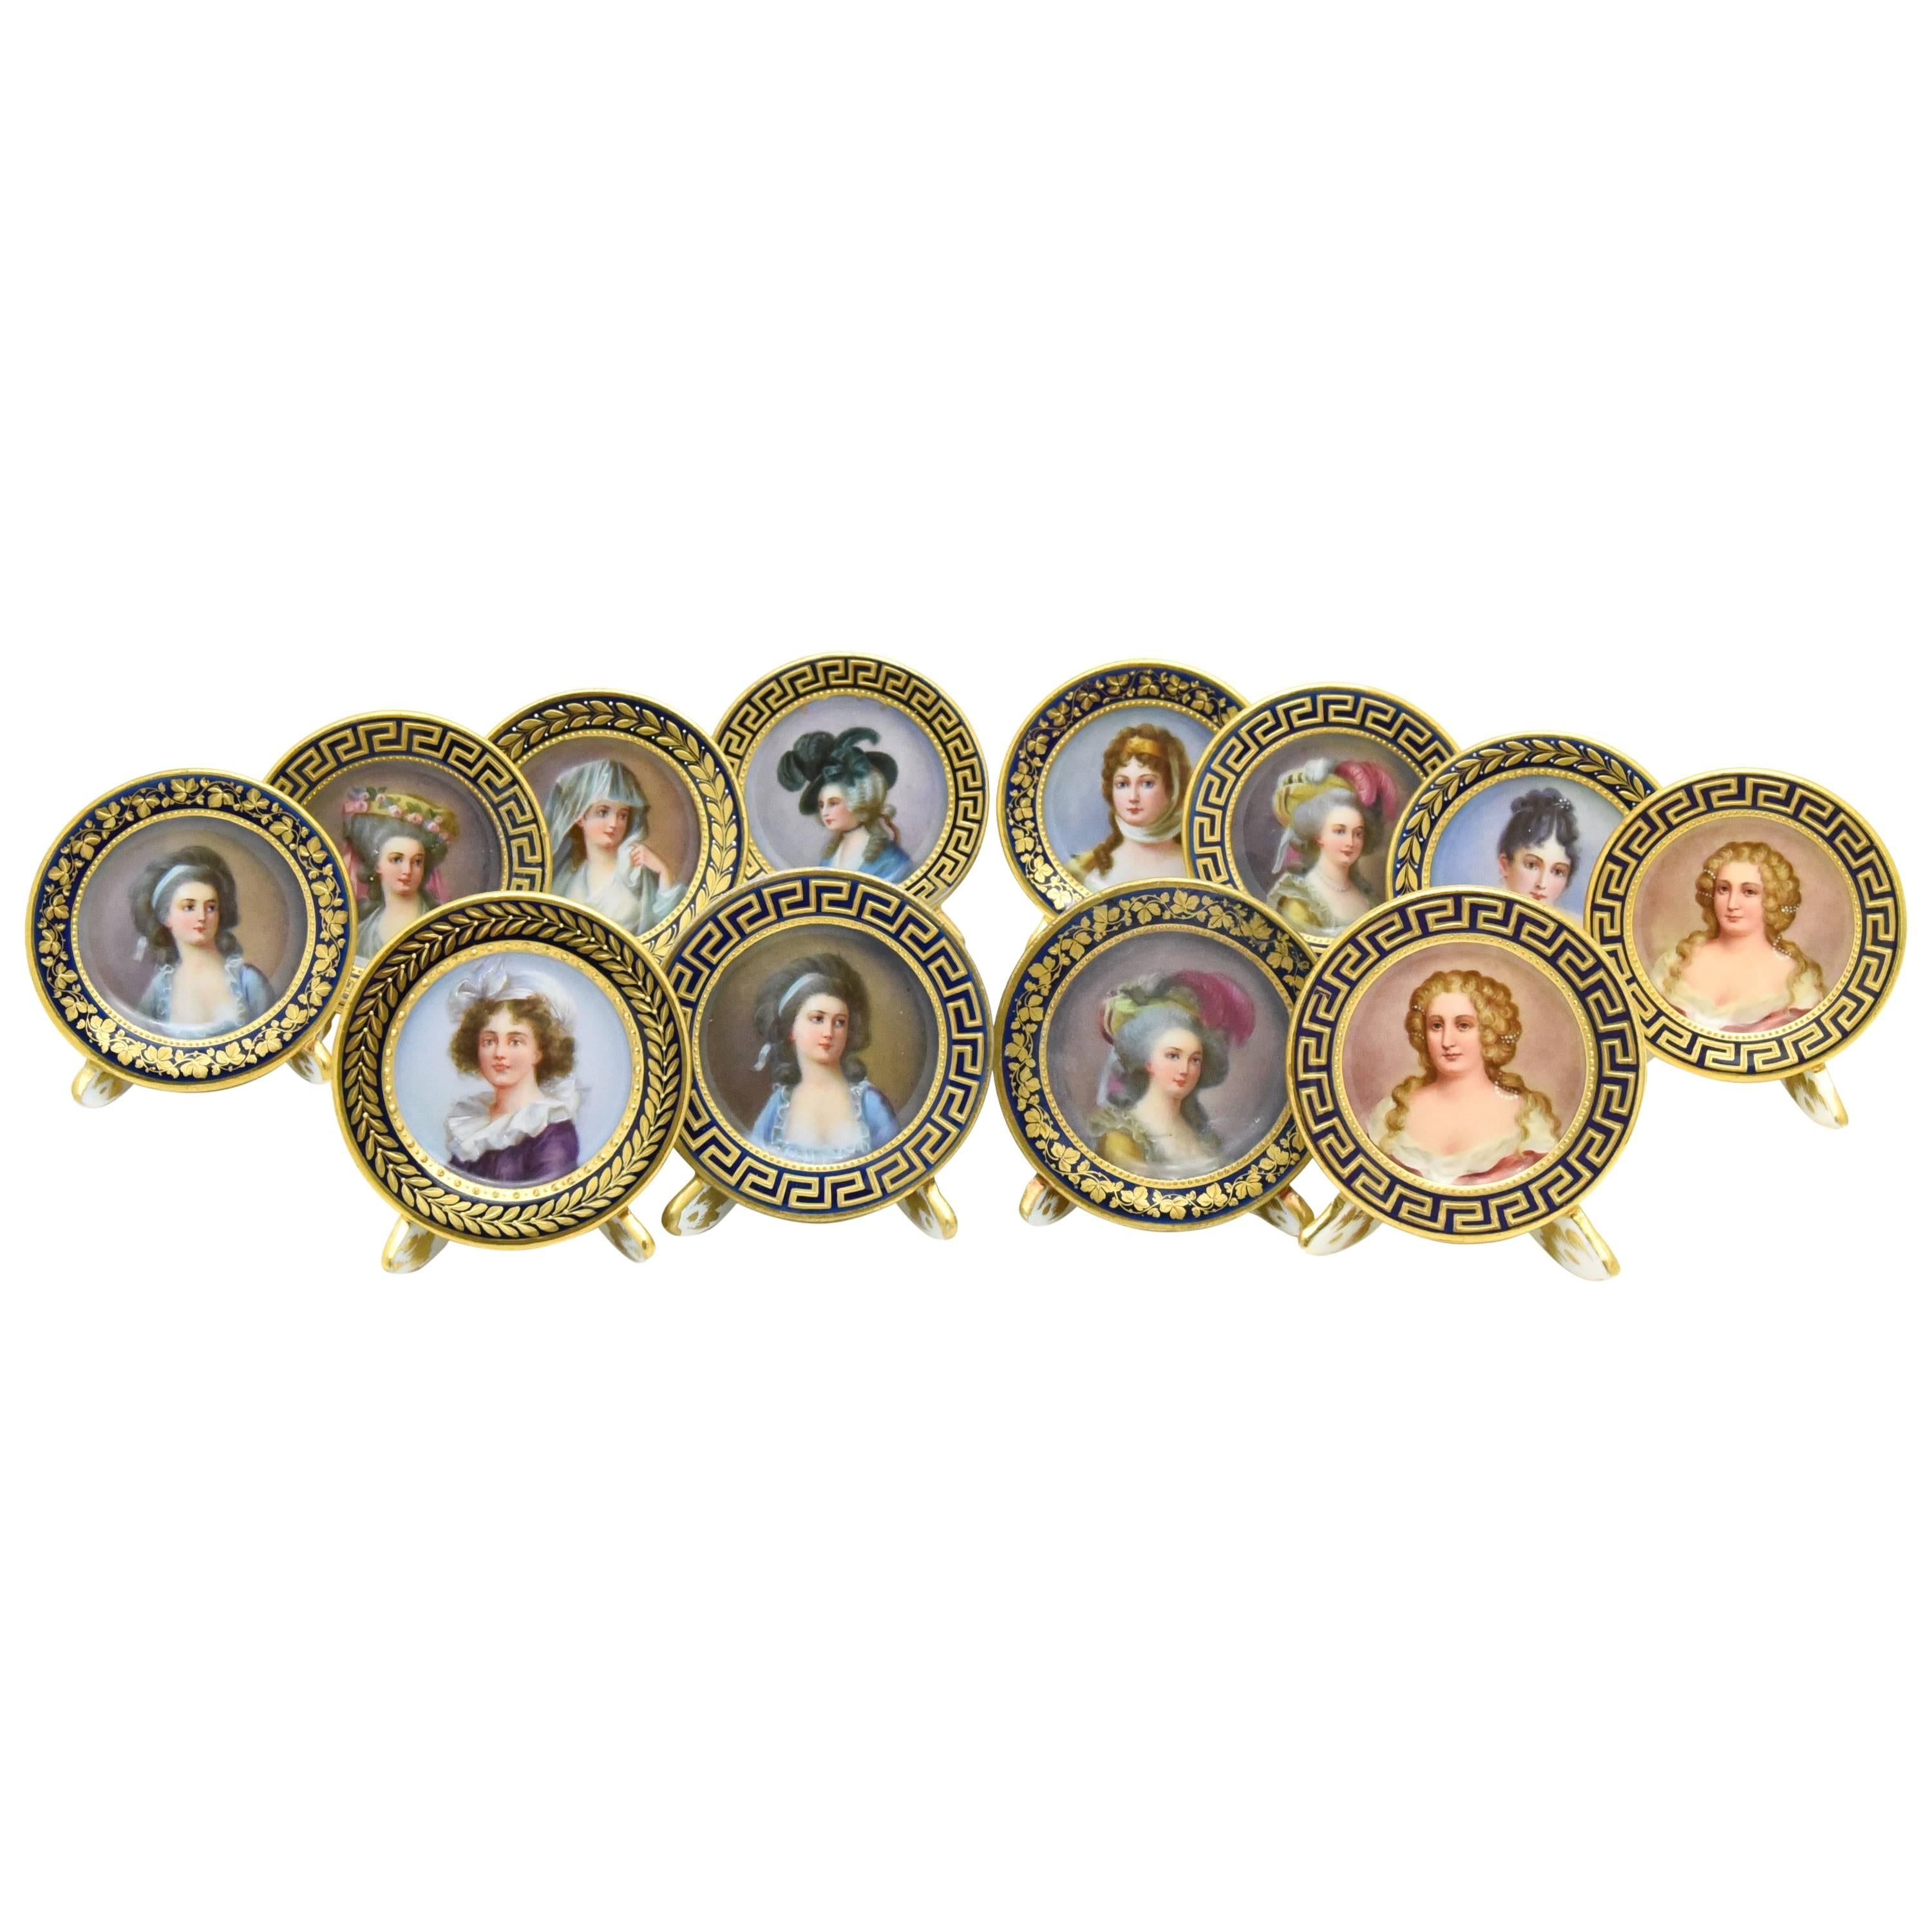 Set of 12 Dresden Hand-Painted Portrait Place Card Holders of French Royalty